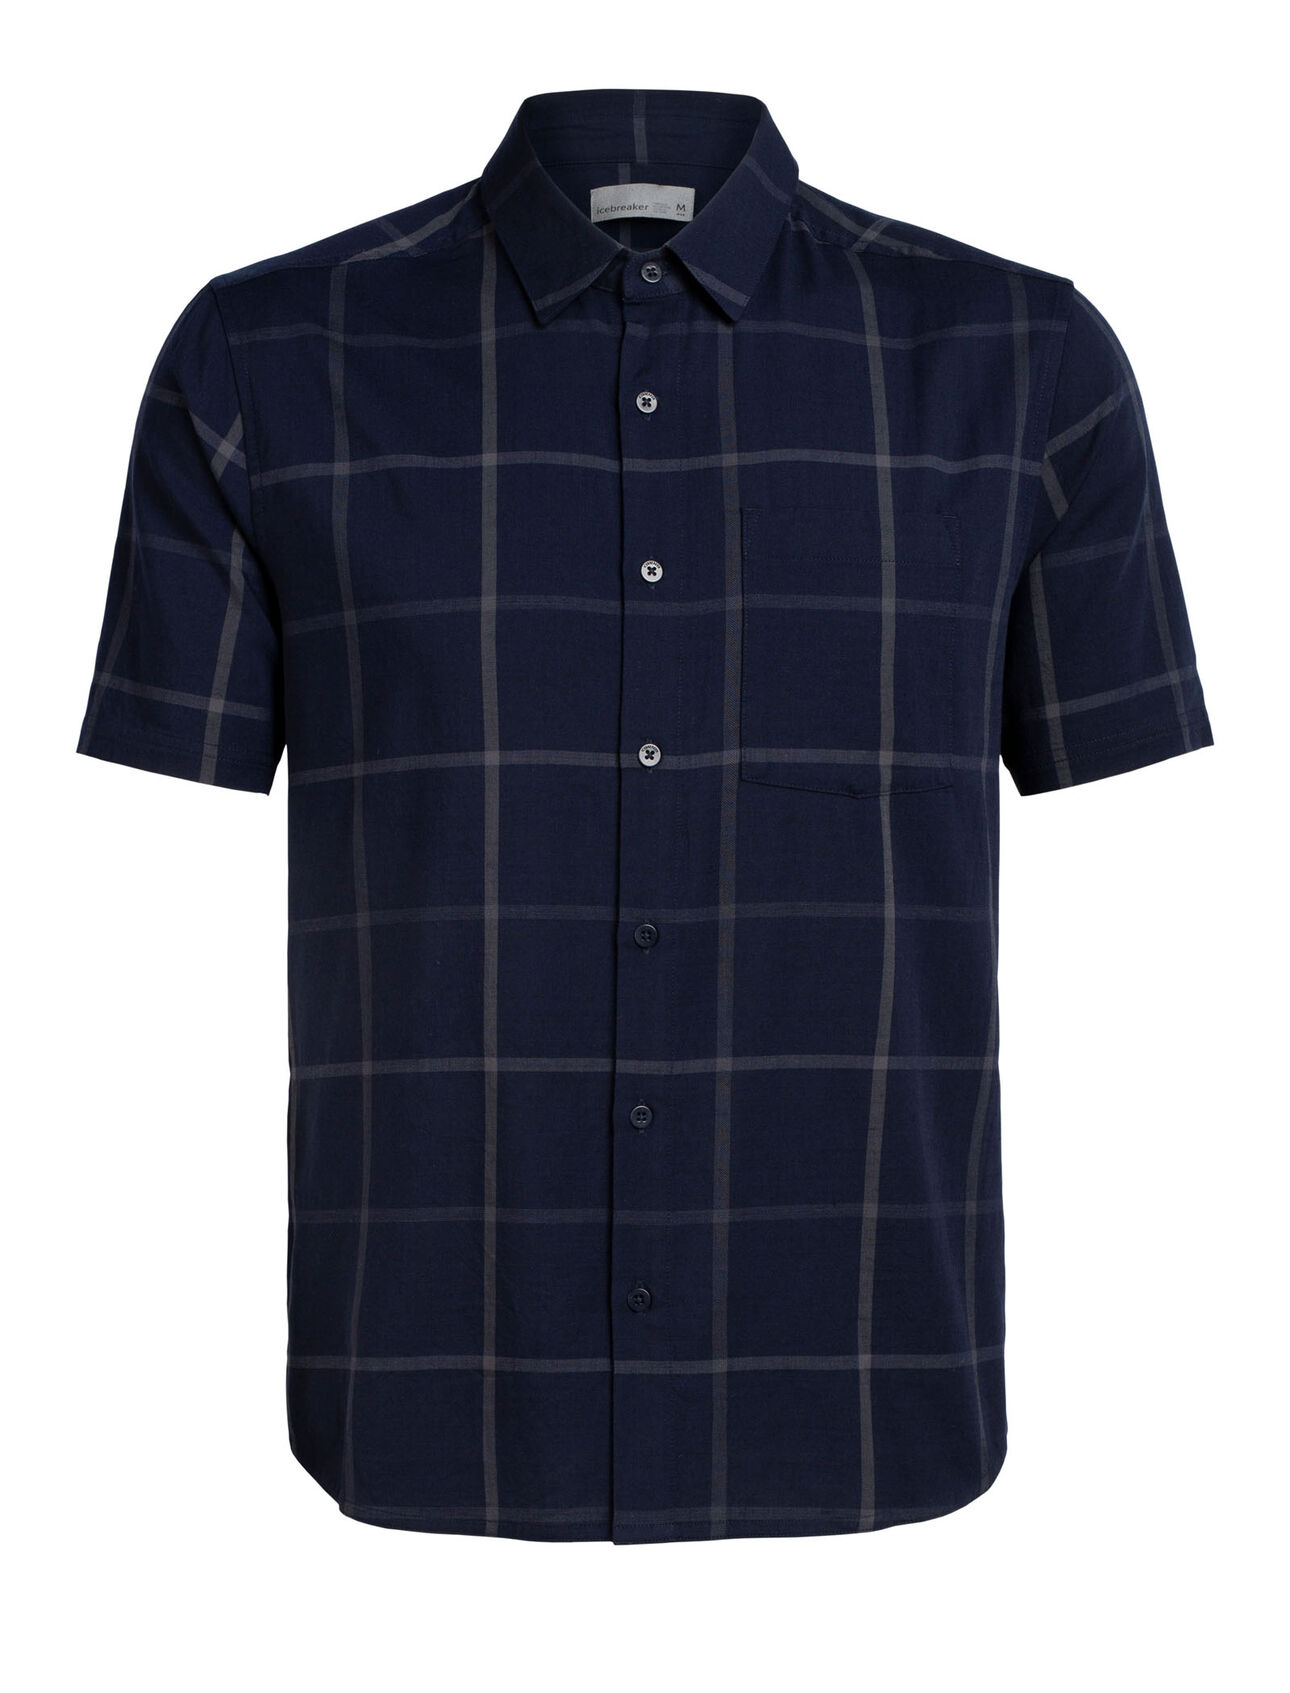 Mens Cool-Lite™ Merino Compass Short Sleeve Shirt A lightweight woven men’s merino wool shirt for travel or daily life, the Compass Flannel Short Sleeve Shirt combines classic style with modern natural fabrics.